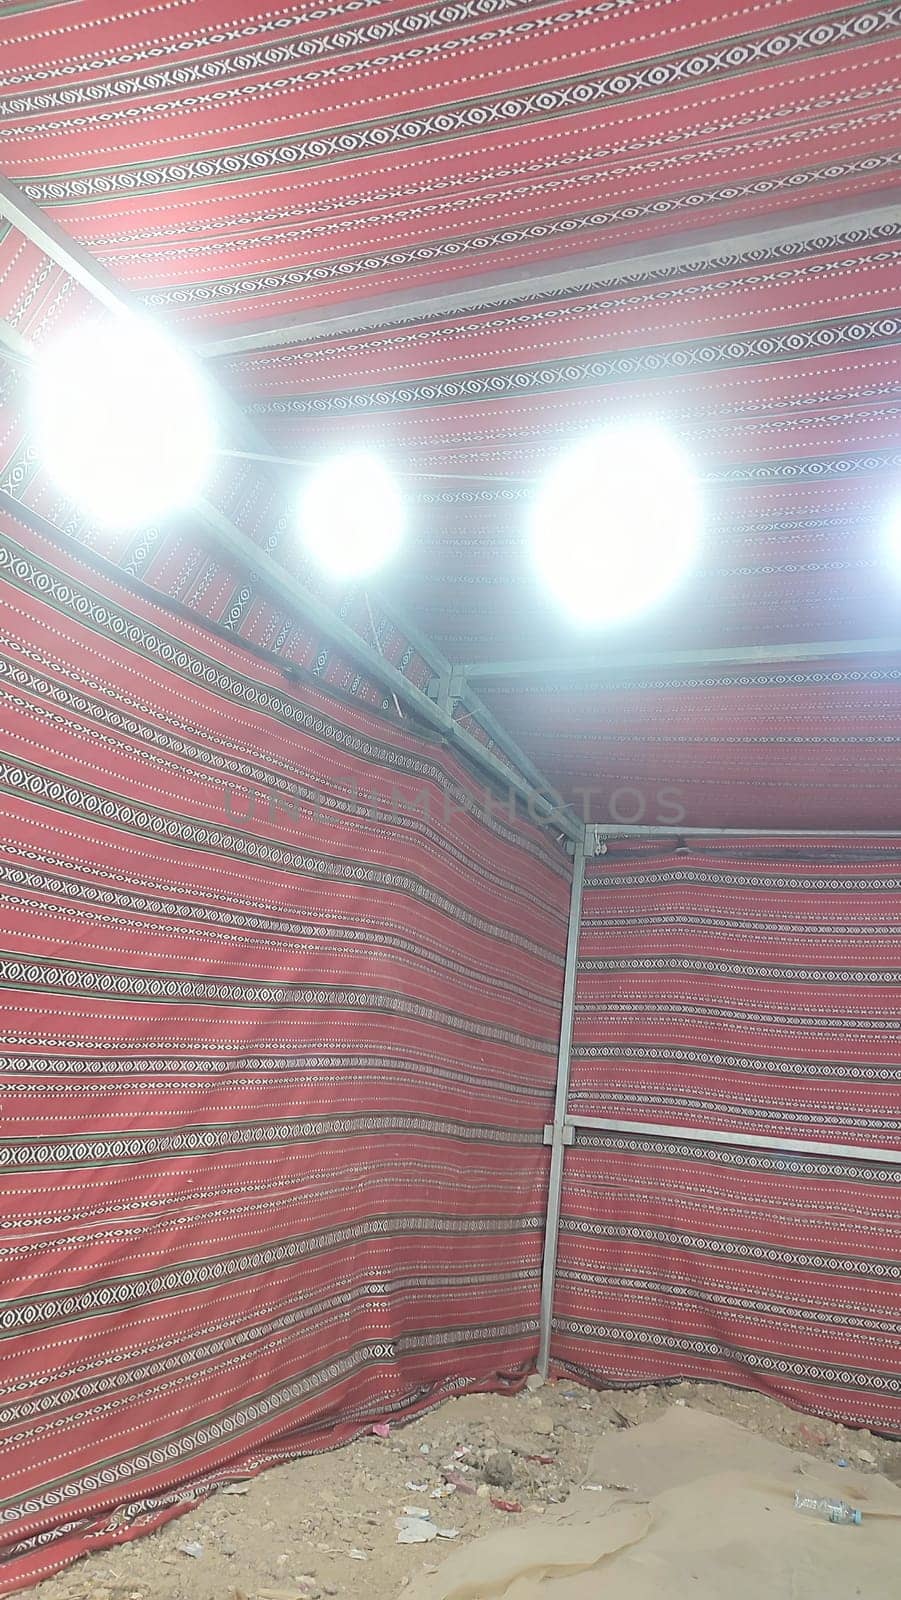 Bedouin tent, red traditional fabric, light bulbs. High quality photo